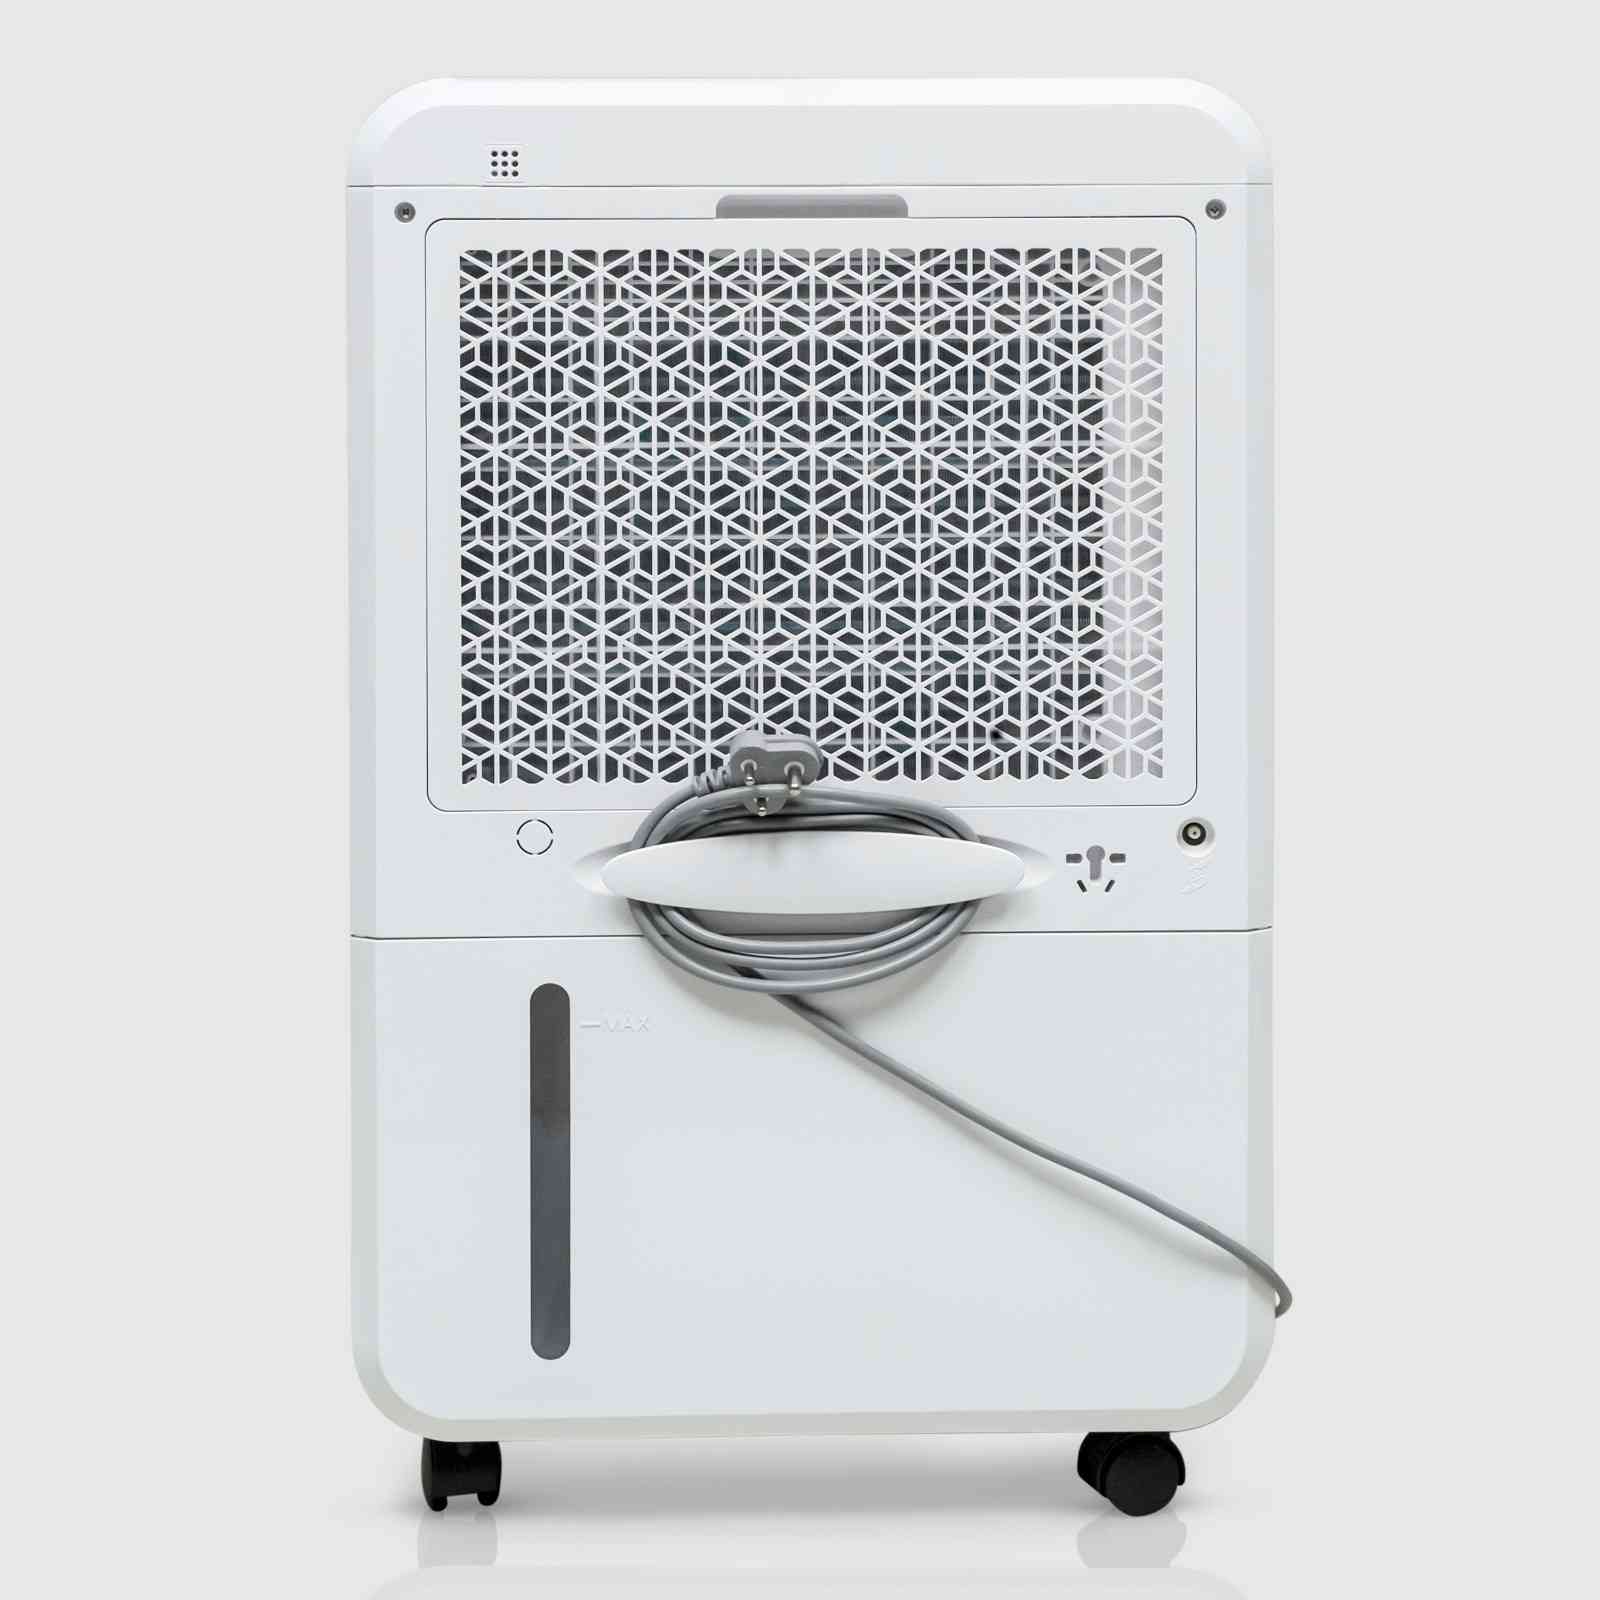 Rear view of the White Westinghouse Dehumidifier WDE702, showcasing the air vent, power cord neatly wrapped, and water level indicator. The sleek white design includes casters for easy mobility, making it suitable for maintaining optimal humidity levels in residential and commercial spaces.